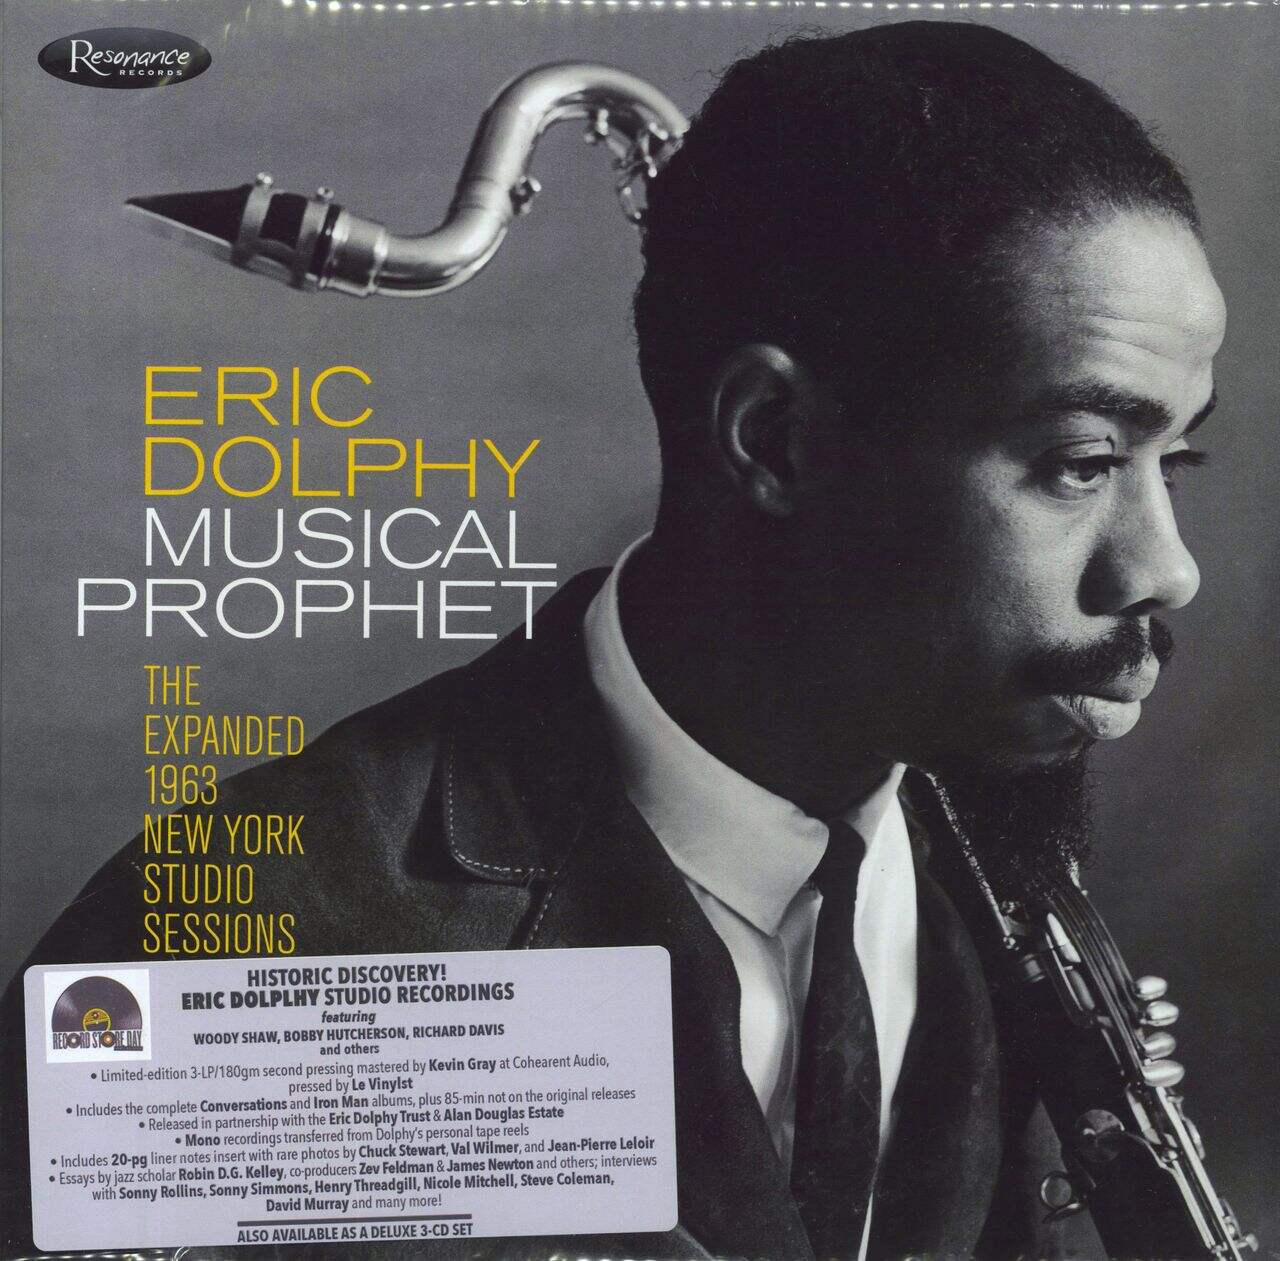 Eric Dolphy Musical Prophet (The Expanded 1963 New York Studio Sessions) - 180gm US 3-LP vinyl set